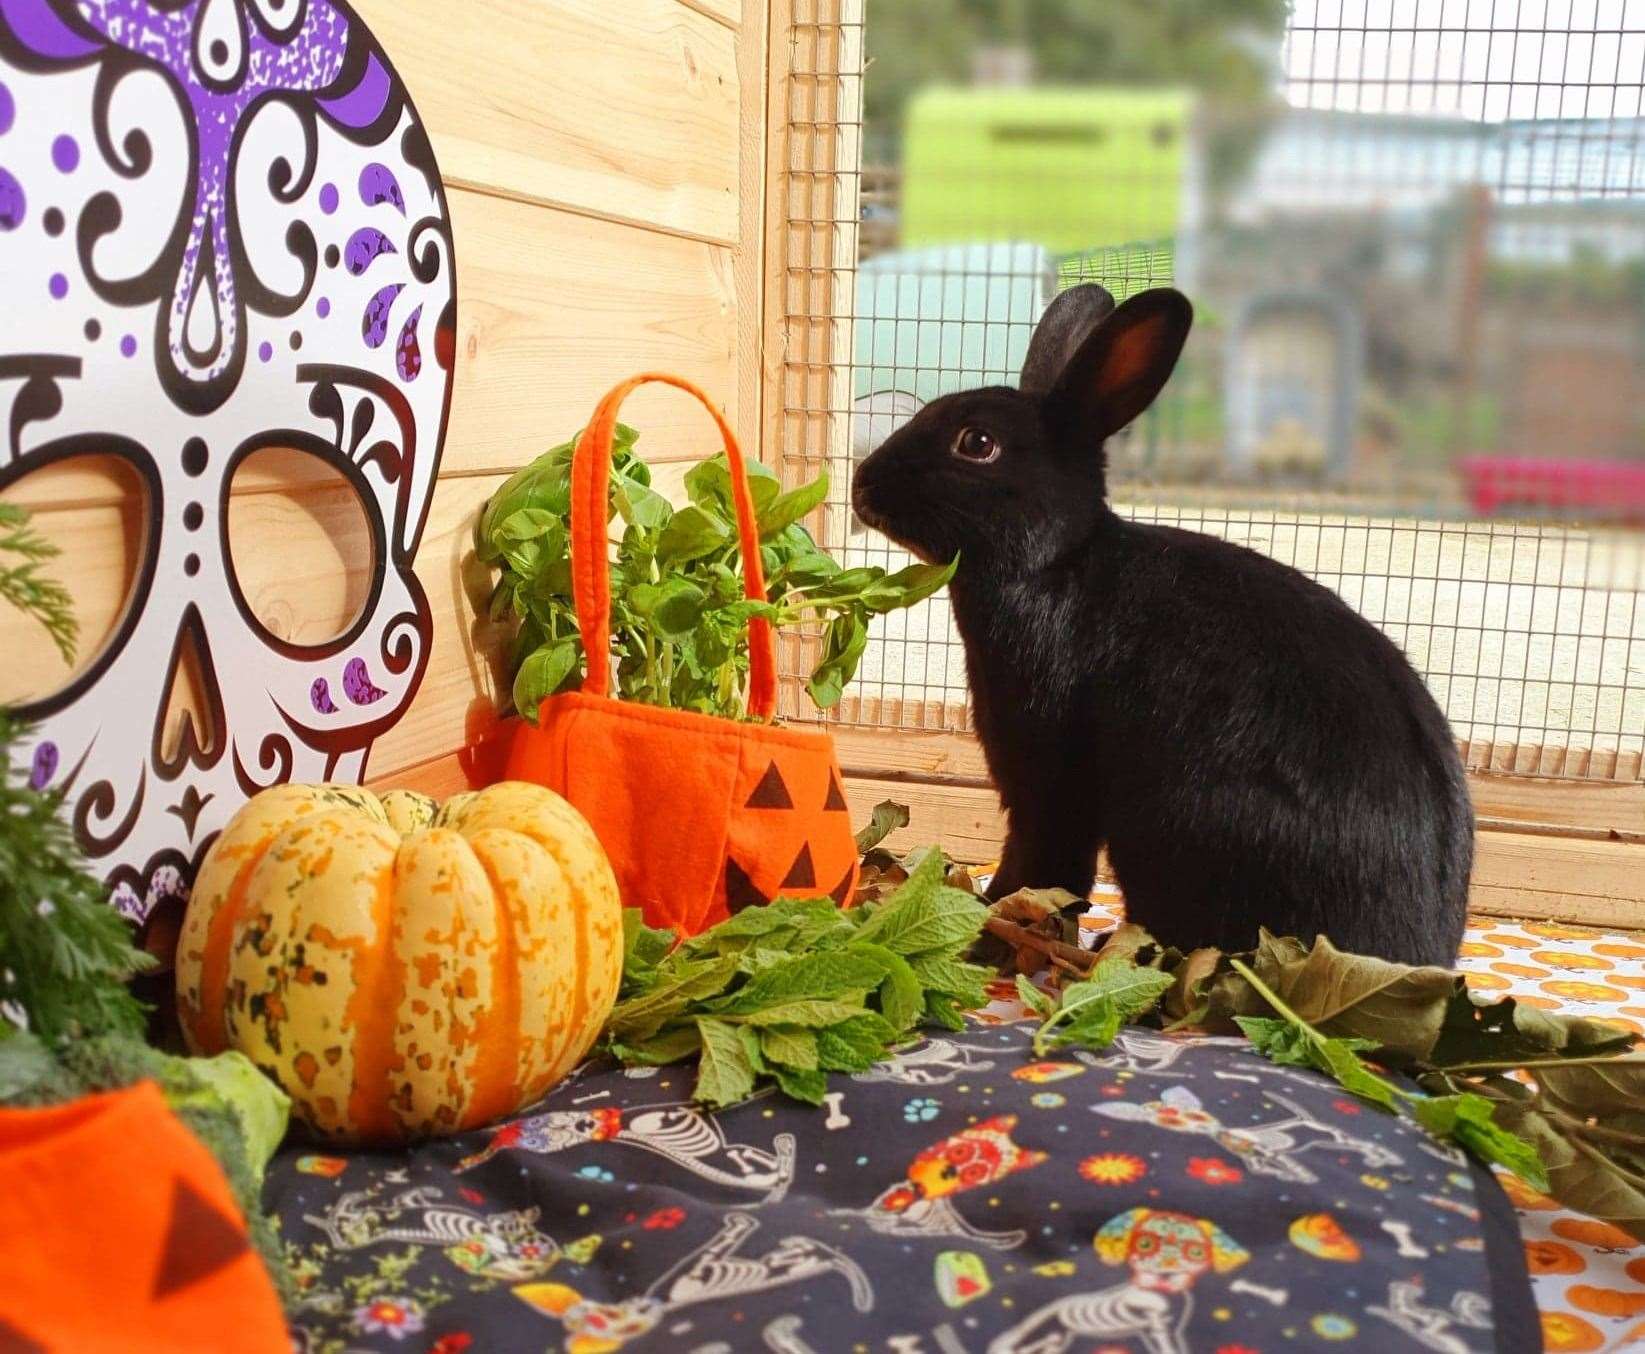 The North West Kent branch of the RSPCA has rescued more than 50 abandoned rabbits so far this year, with black rabbits taking the longest to be adopted